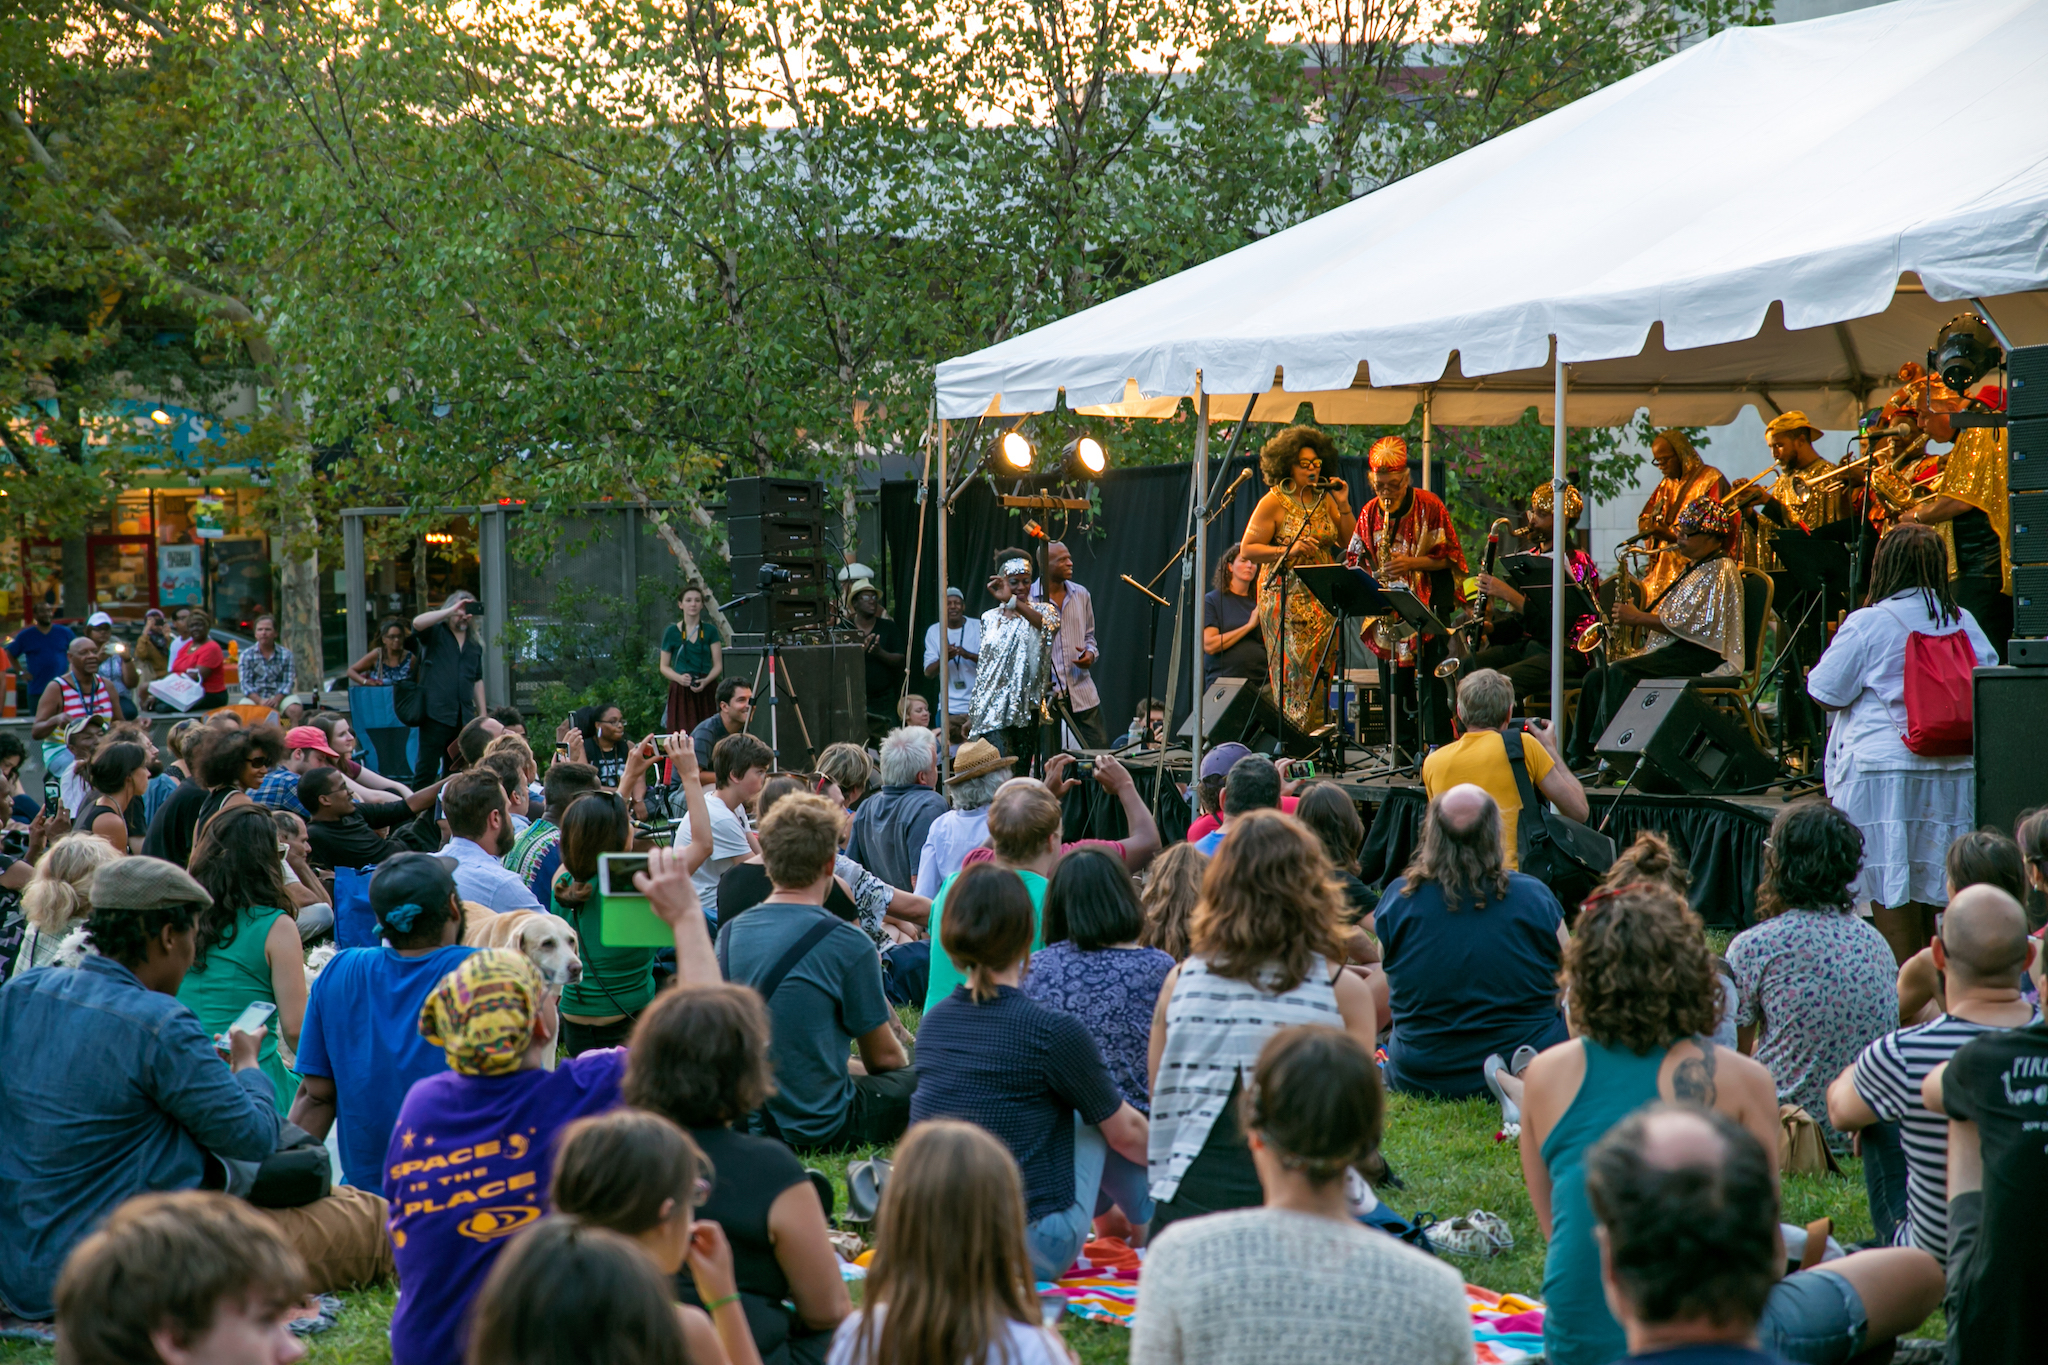 The Best Festivals in Philadelphia to Check Out This Summer